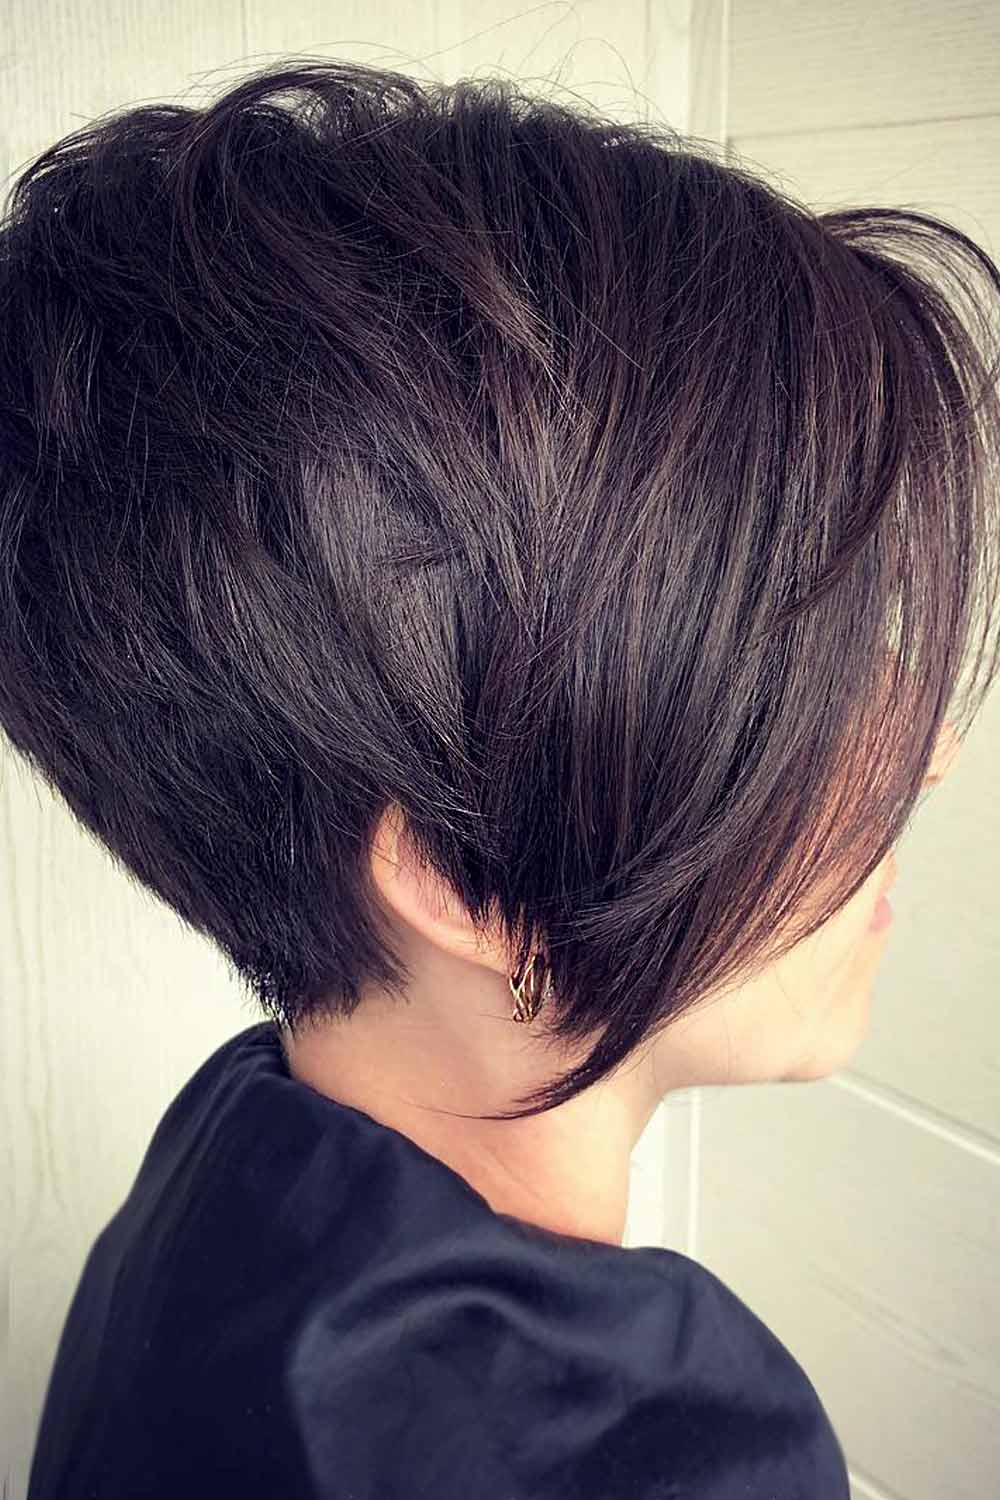 Tapered Long Pixie Cut with An Elongated Fringe #pixiecut #shorthaircut